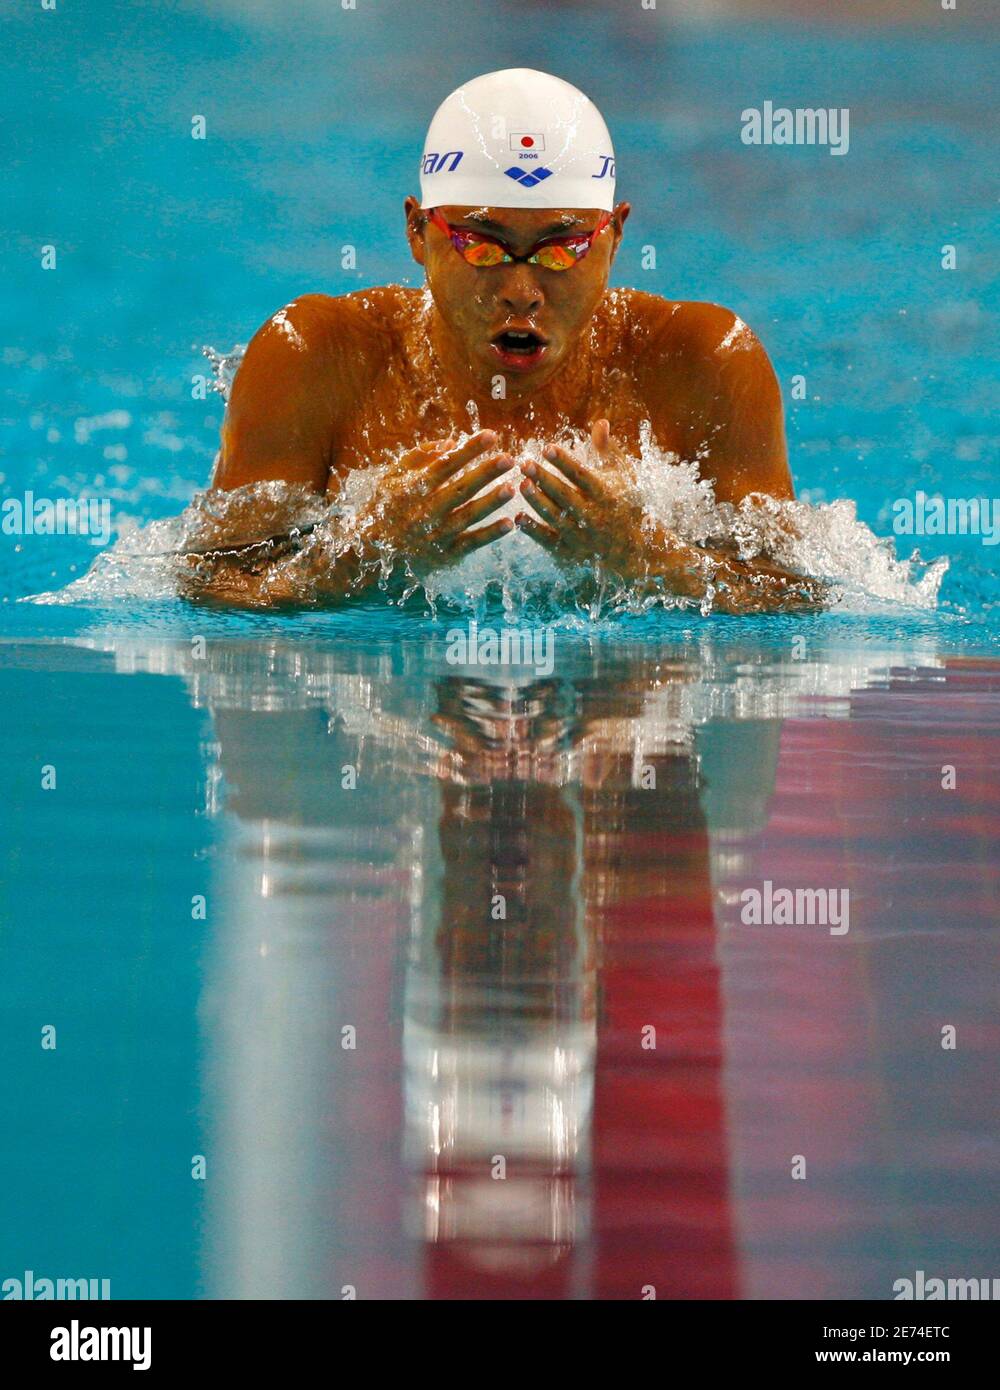 Japan's Daisuke Kimura swims during the men's 200m breaststroke swimming  heats at the 15th Asian Games in Doha December 7, 2006. REUTERS/Jerry Lampen  (QATAR Stock Photo - Alamy